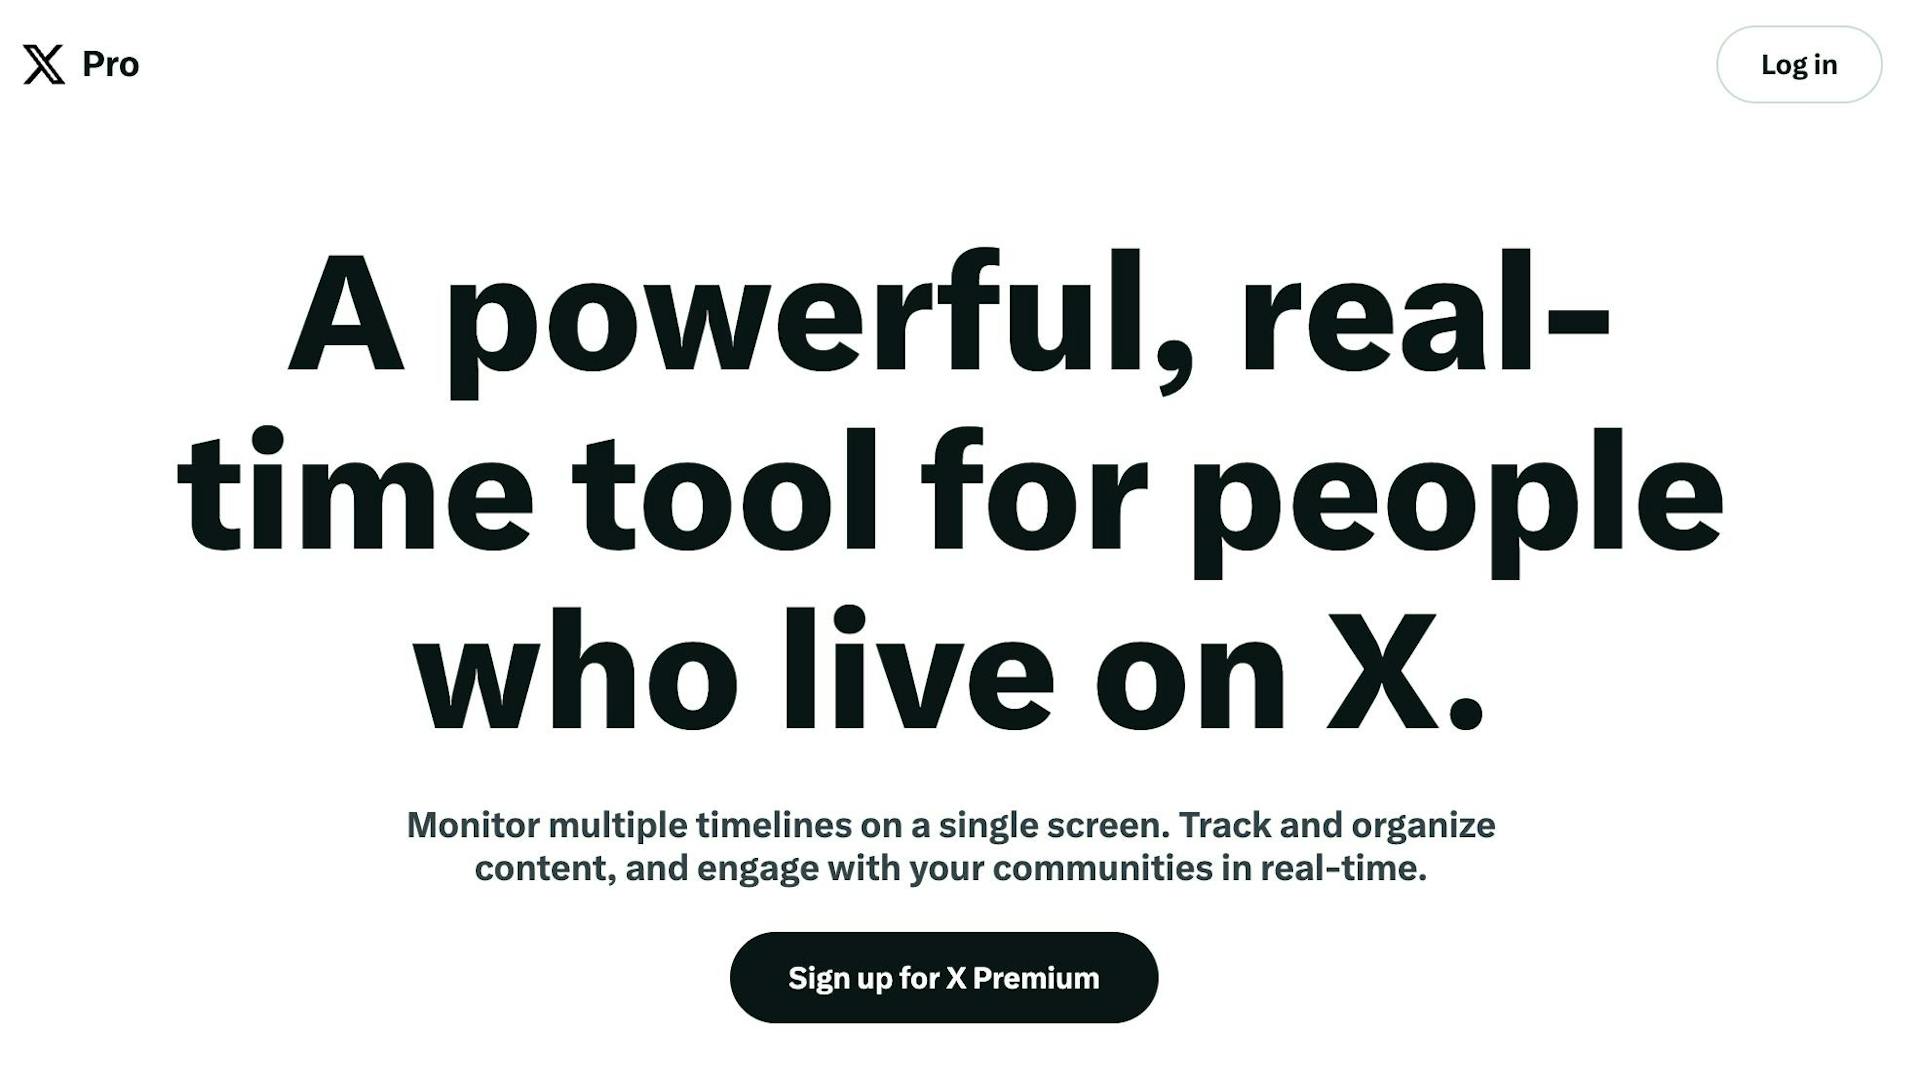 The X Pro login page, which reads "A powerful, real-time tool for people live on X."